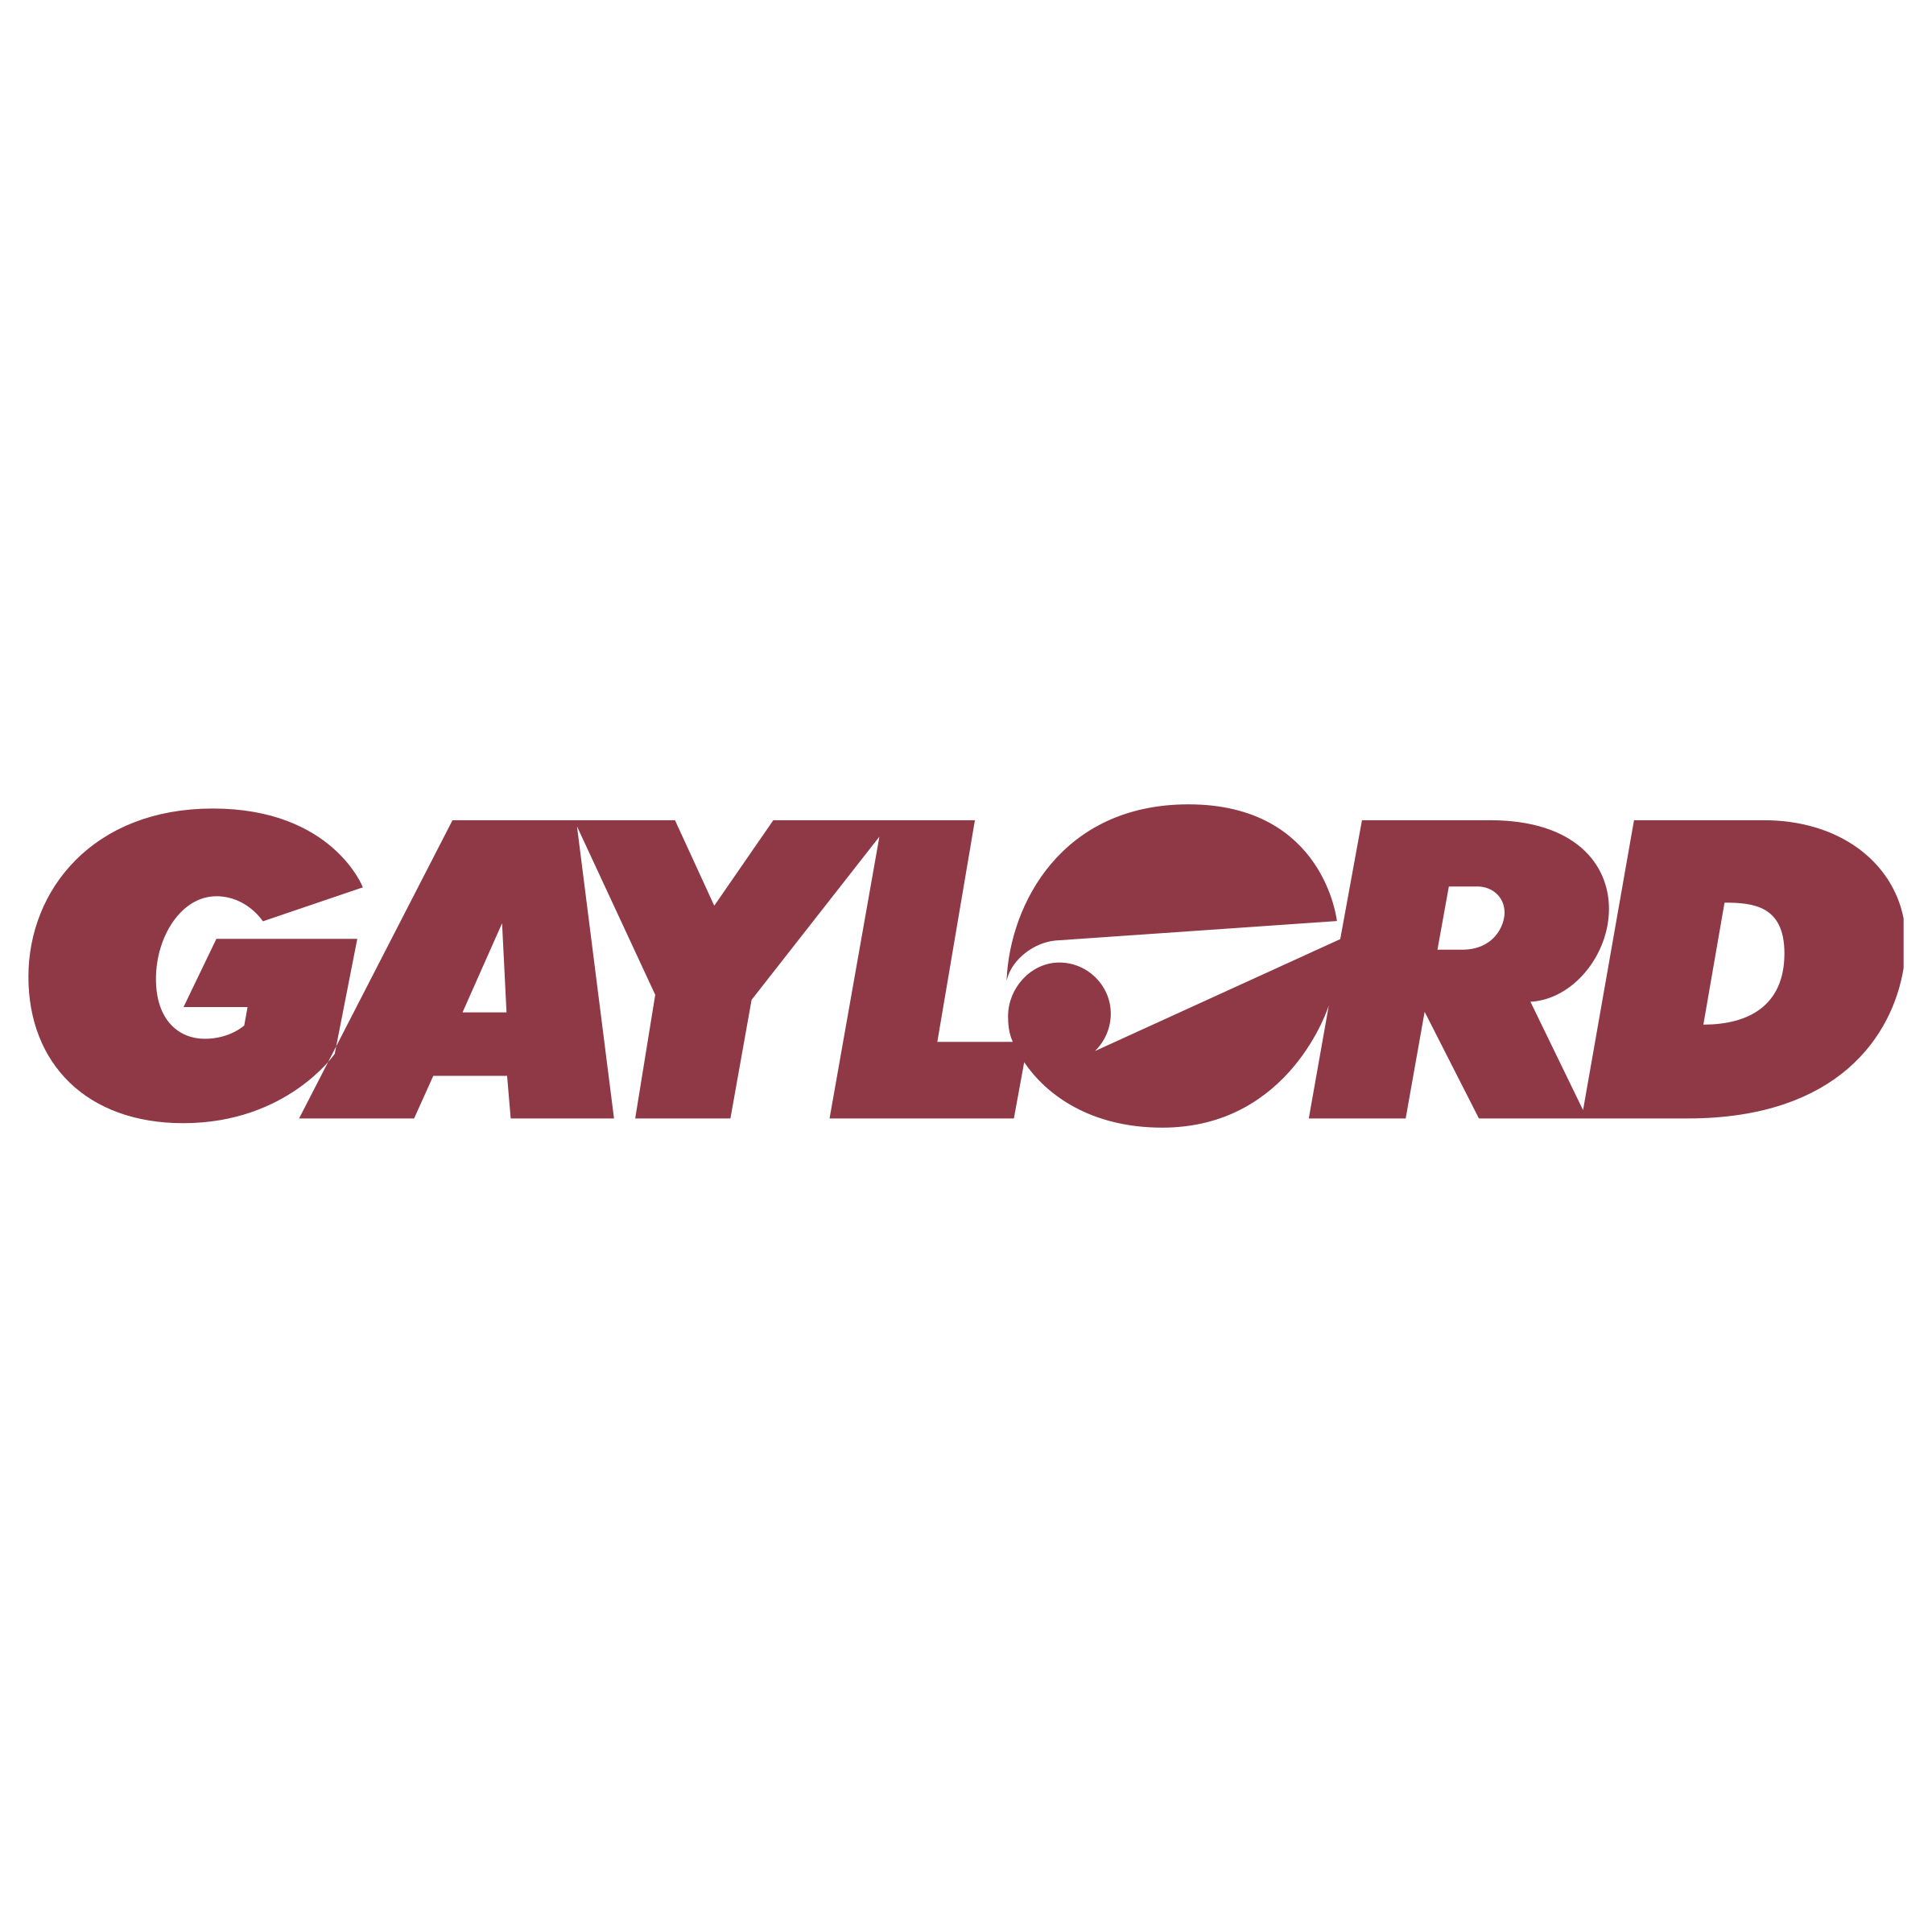 Gaylord Logo - Gaylord Container Logo PNG Transparent & SVG Vector - Freebie Supply